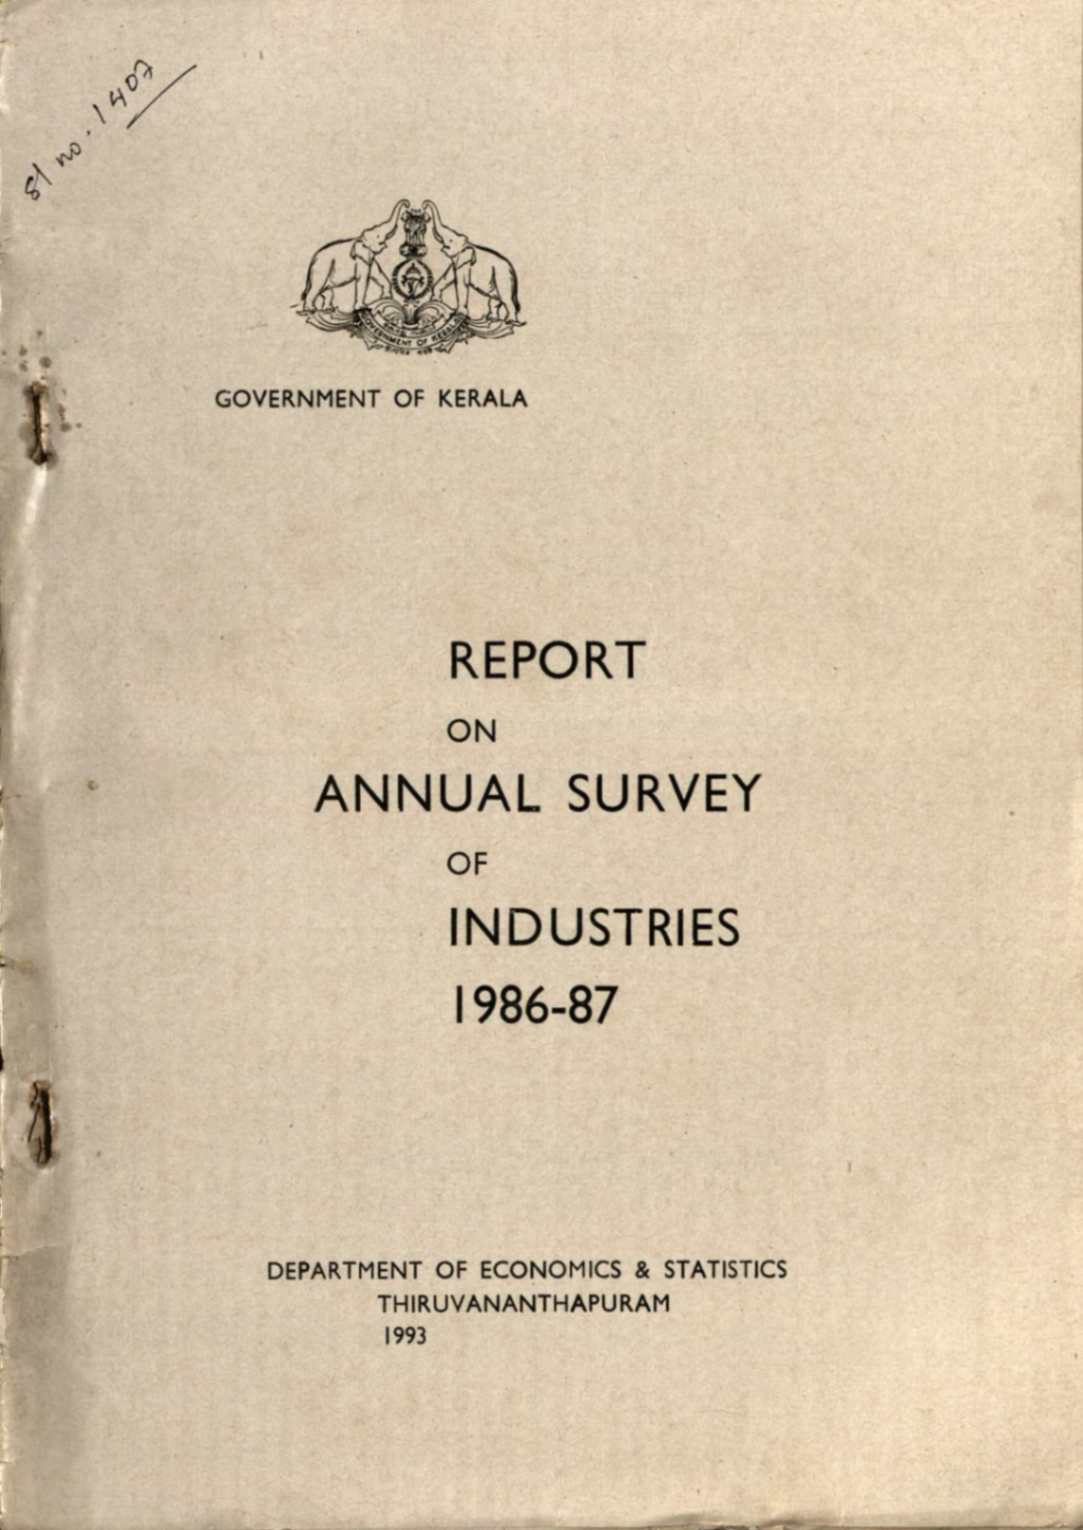 Report On Annual Survey Of Industries 1986-87